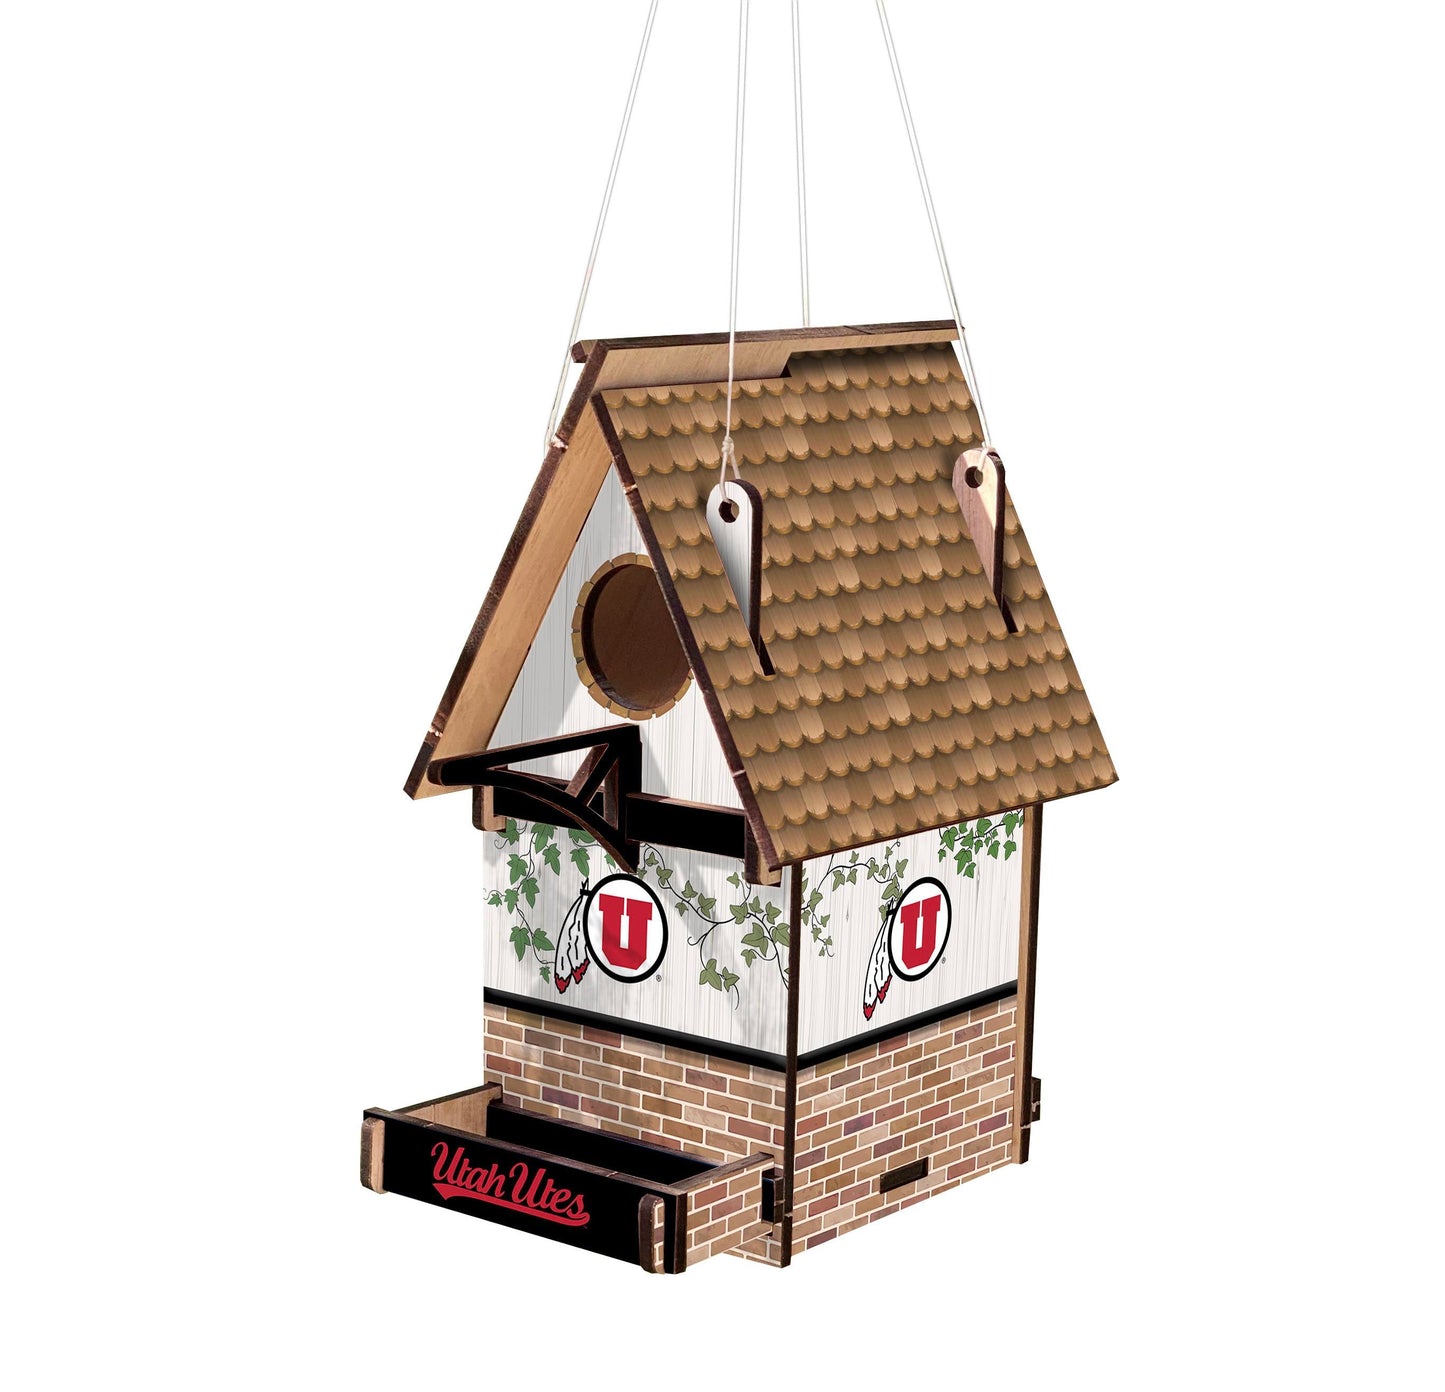 Show your passion for the Utah Utes and your love of birds with this officially licensed NCAA Wood Birdhouse by Fan Creations. Crafted from MDF and featuring bold team graphics and colors.